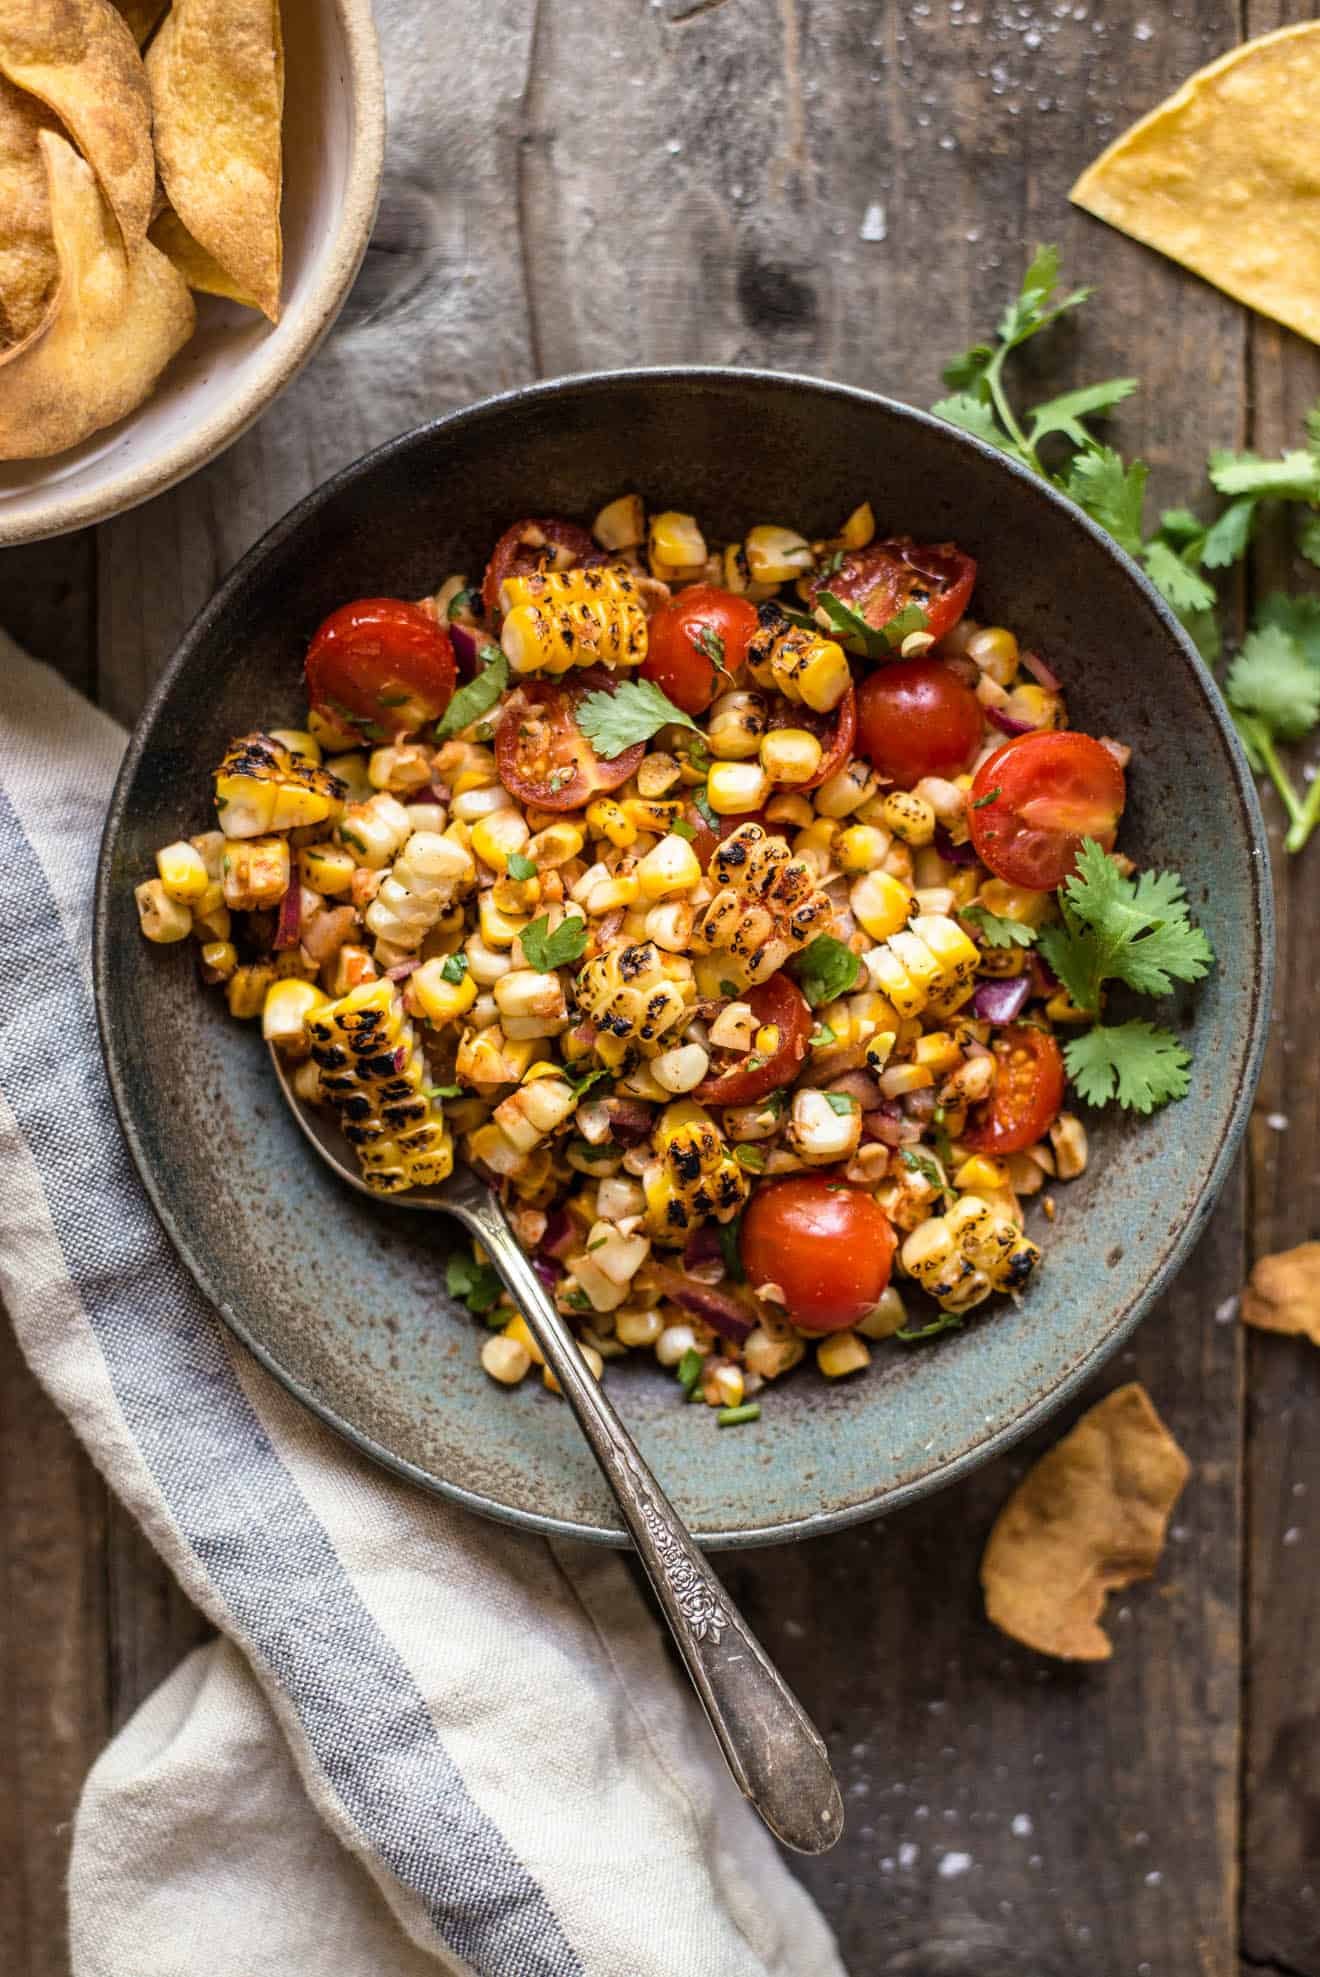 EASY Grilled Corn Salsa (without the BBQ Grill) - This simple grilled corn salsa is prepared with the corn grilled right on the stove! Great for parties and gatherings!